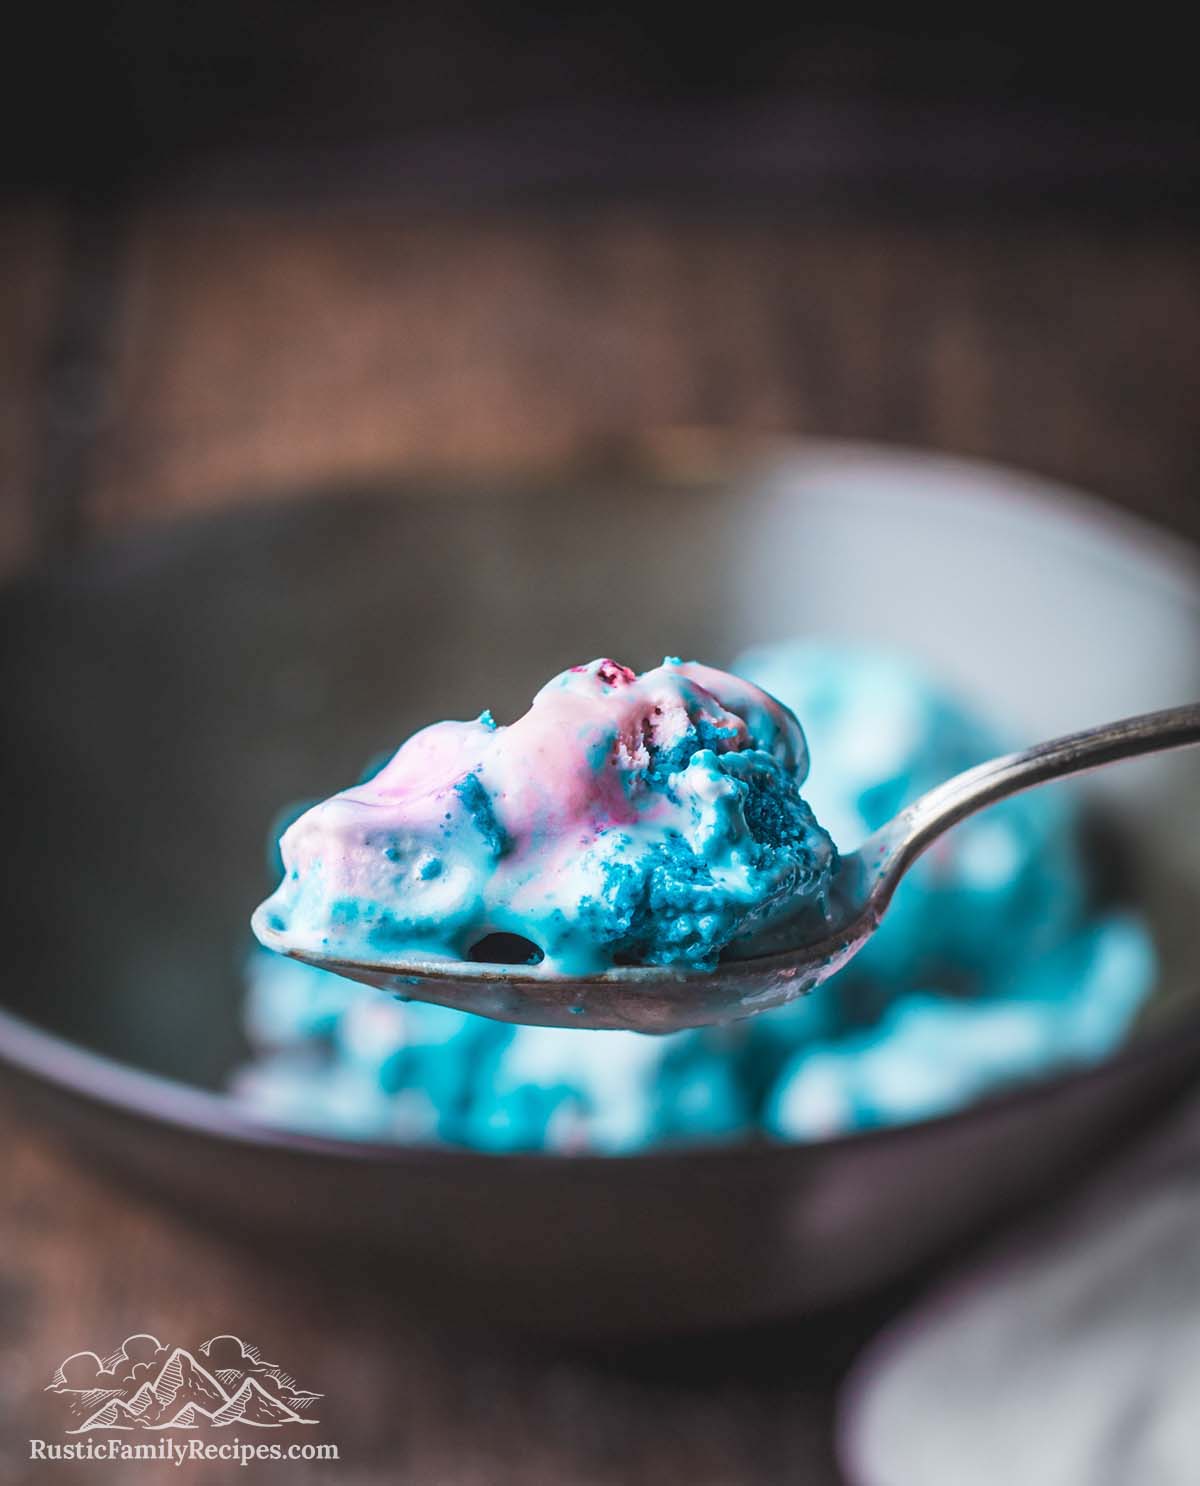 A scoop of homemade cotton candy ice cream on a spoon